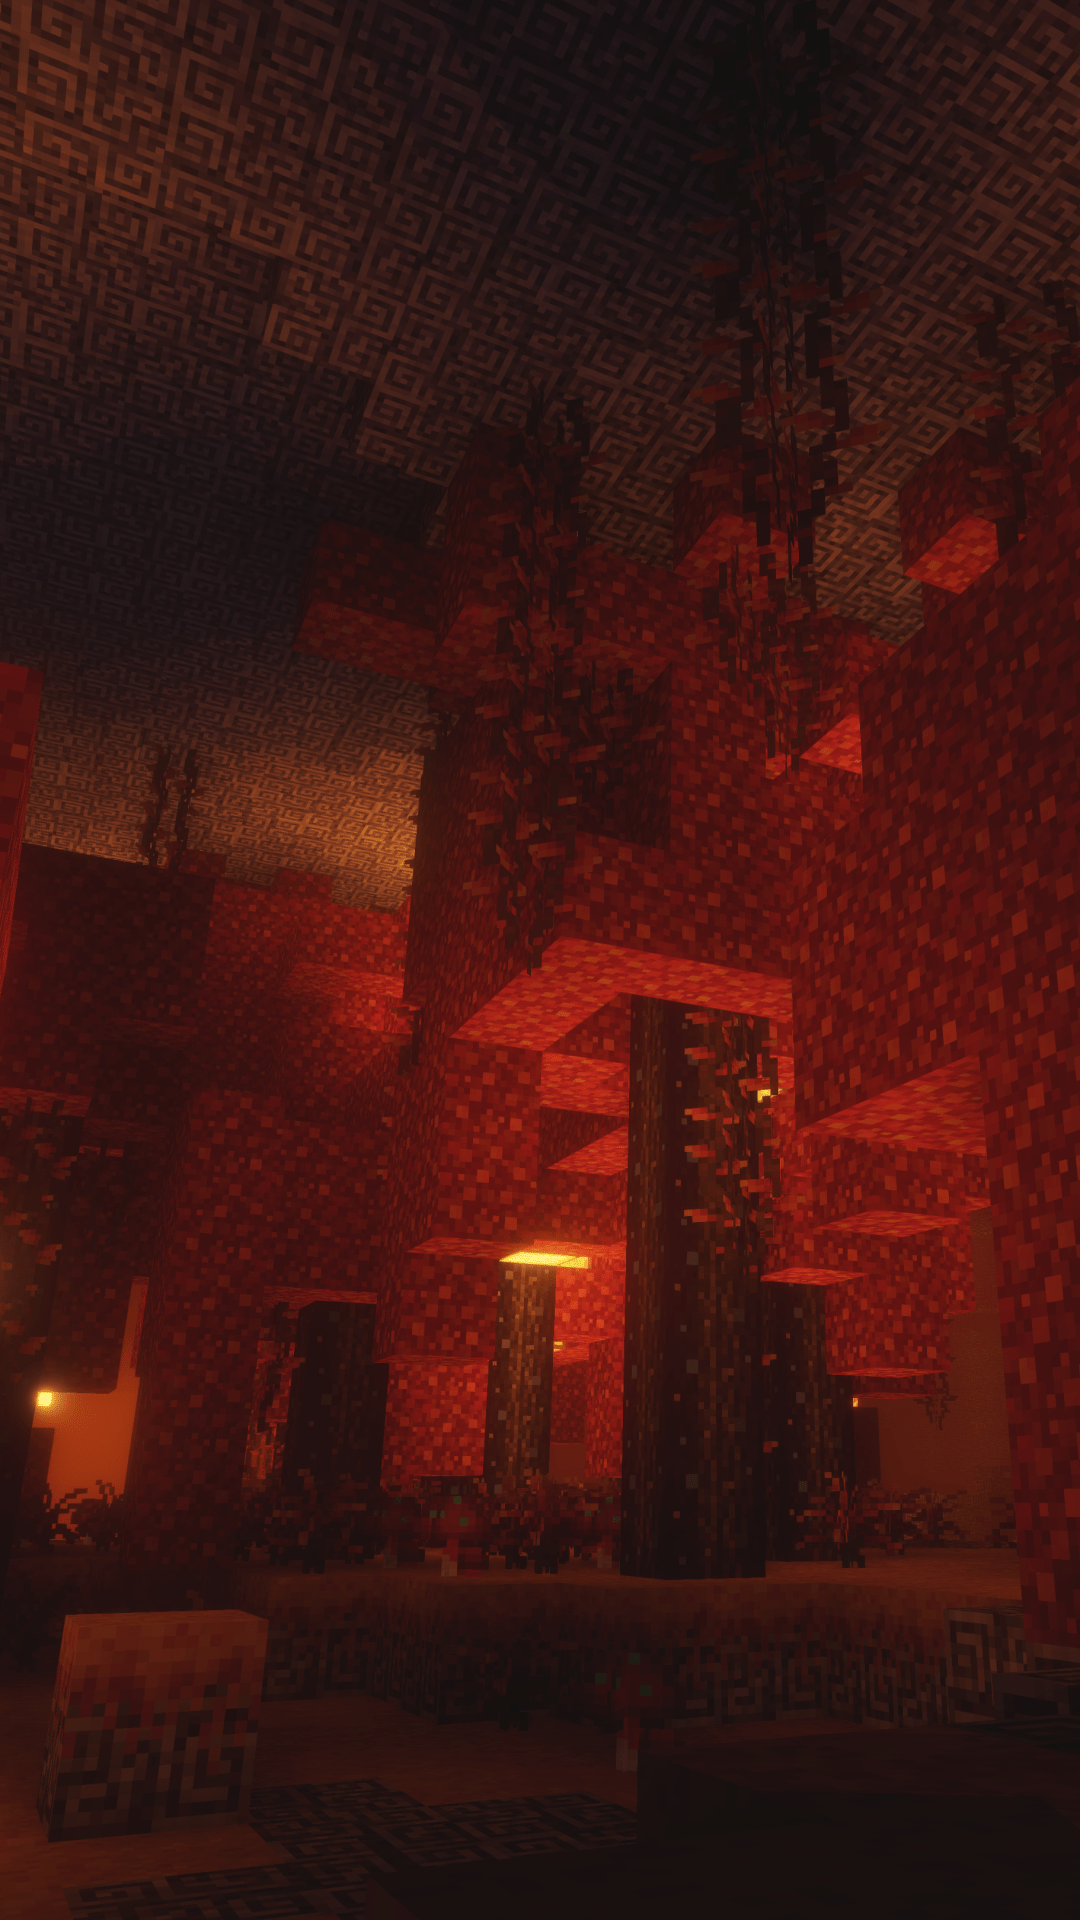 A screenshot of a Minecraft Nether fortress with a redstone roof - Crimson, Minecraft